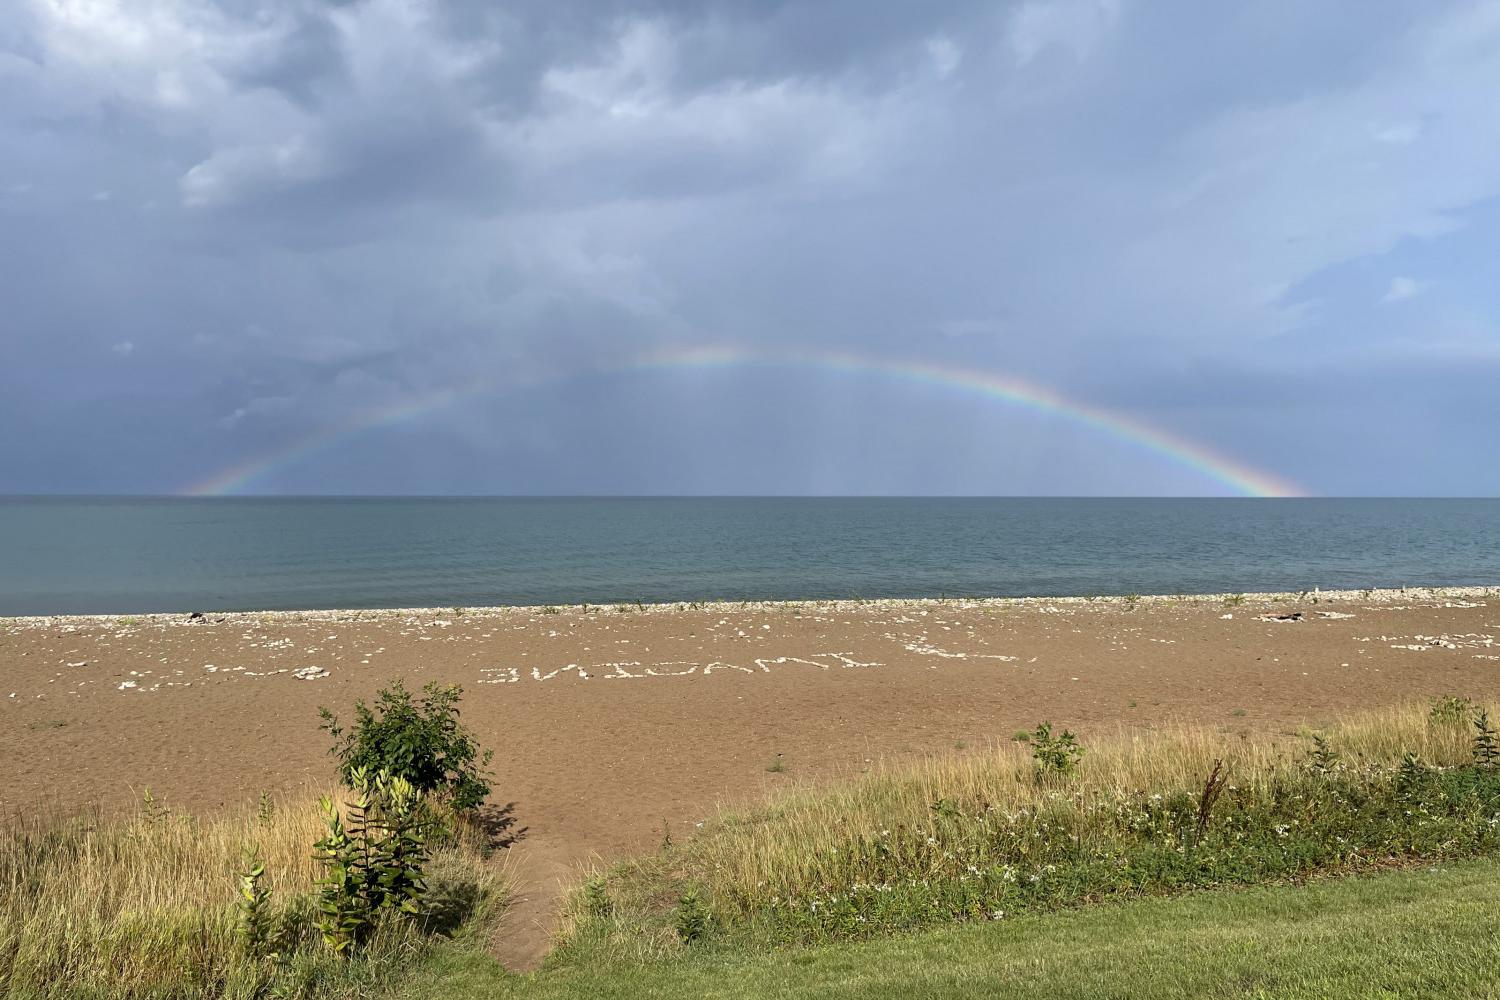 You may catch a rainbow over Lake Michigan after a storm!